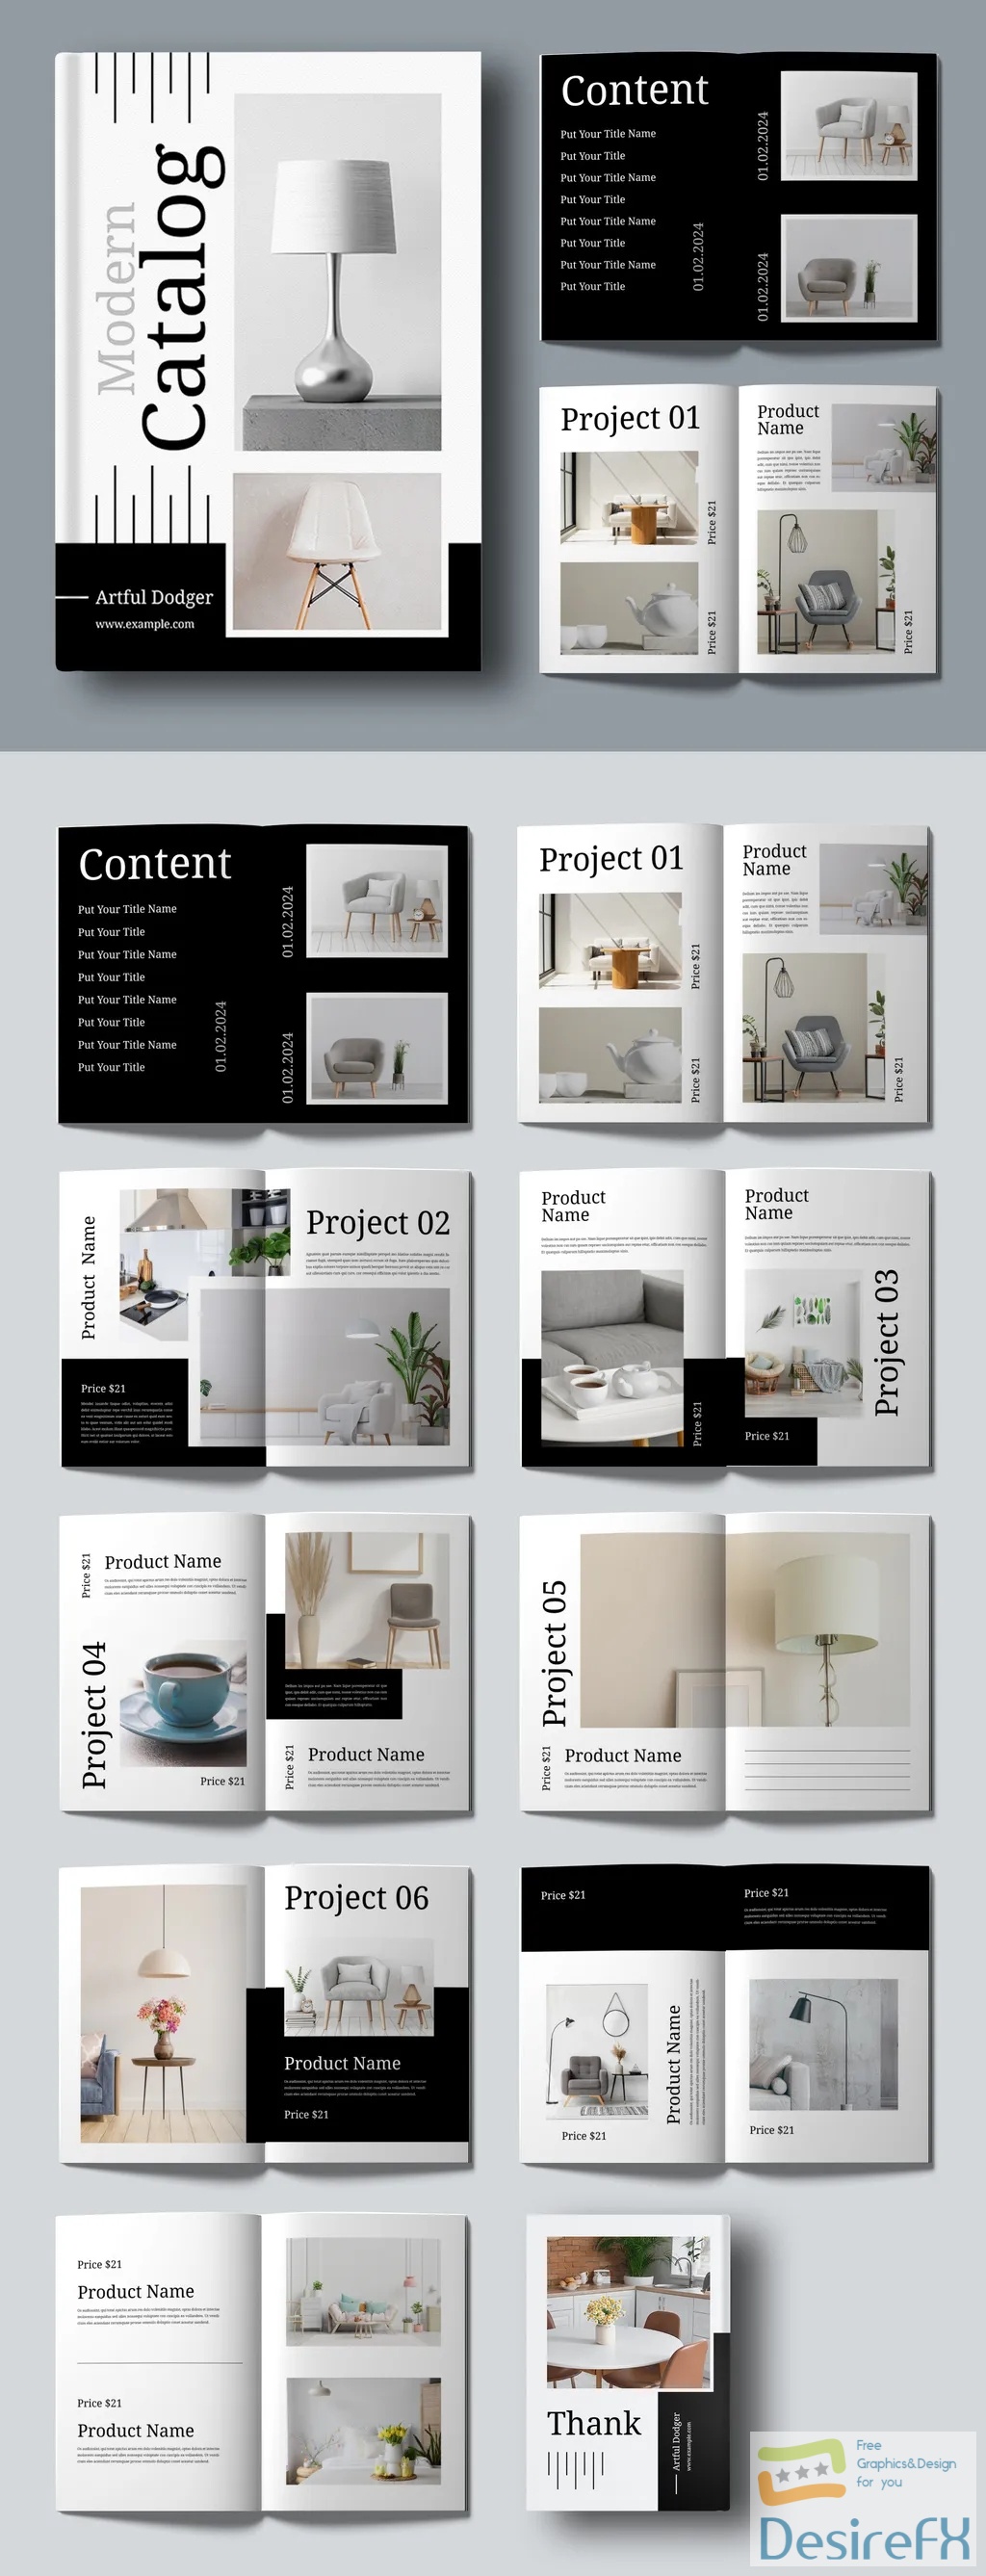 Adobestock - Product Catalog Template Layout 718529941